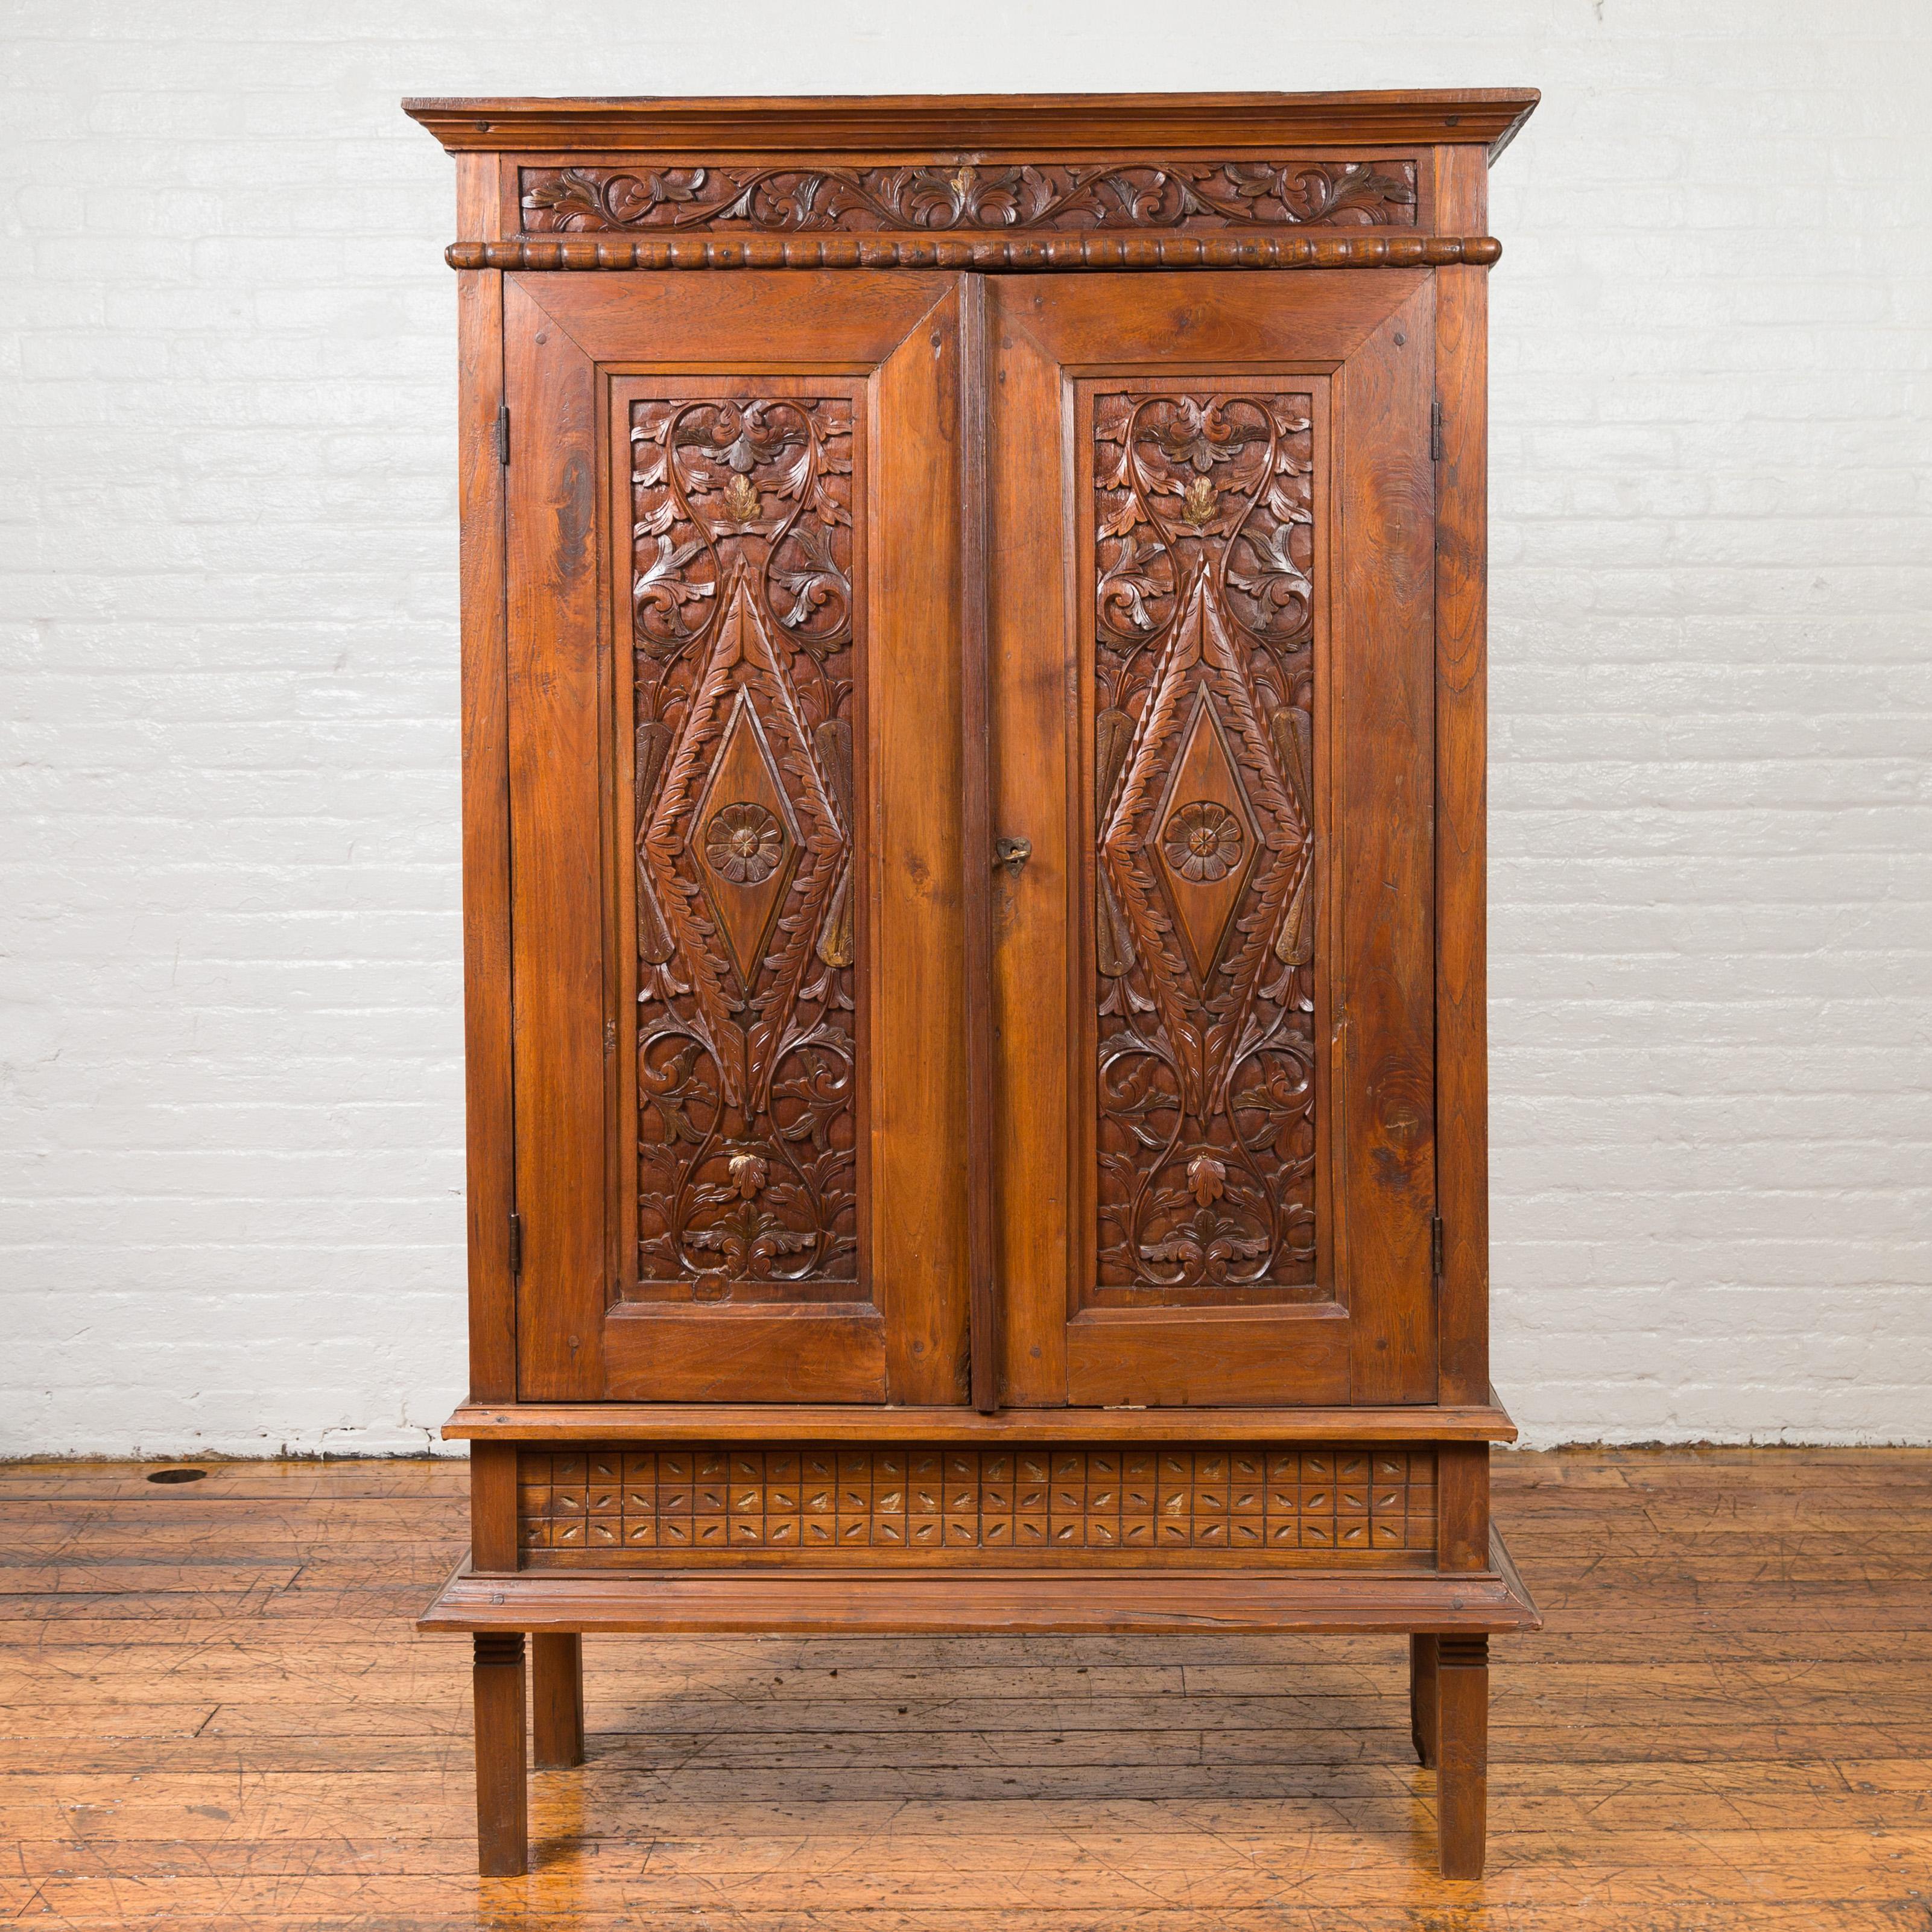 An antique Indonesian wooden cabinet from the 19th century with carved scrolling foliage. Capturing our attention with its clean lines and richly carved décor, this Indonesian cabinet features a molded cornice sitting above a frieze of scrolling